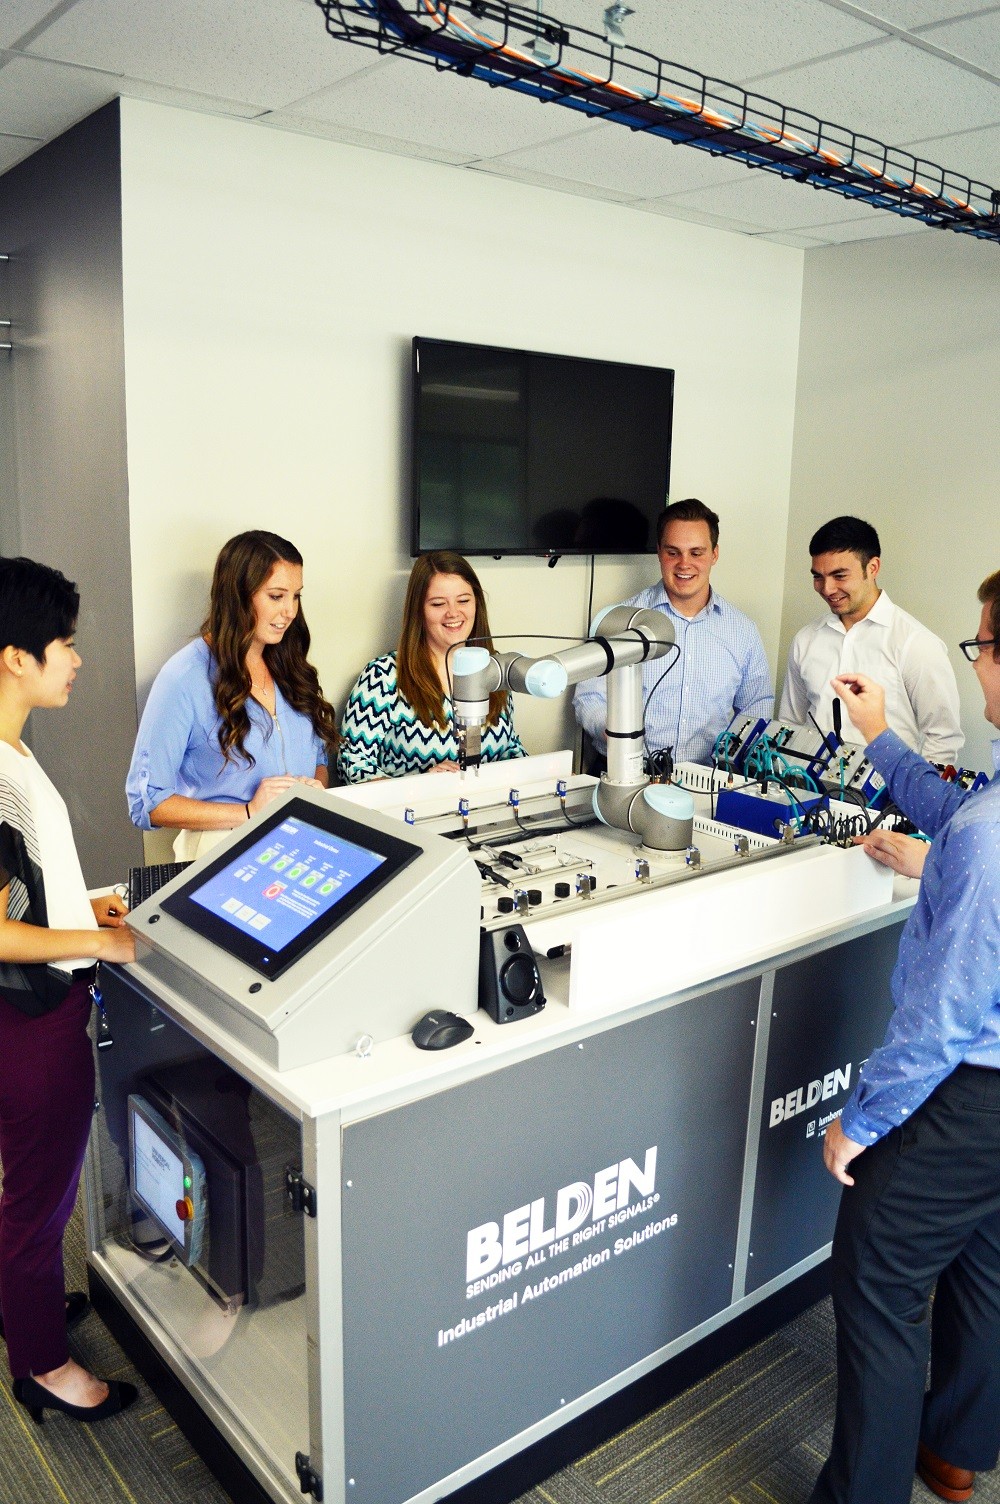 Early Career Leadership Program employees exploring Belden products in the hands-on lab.